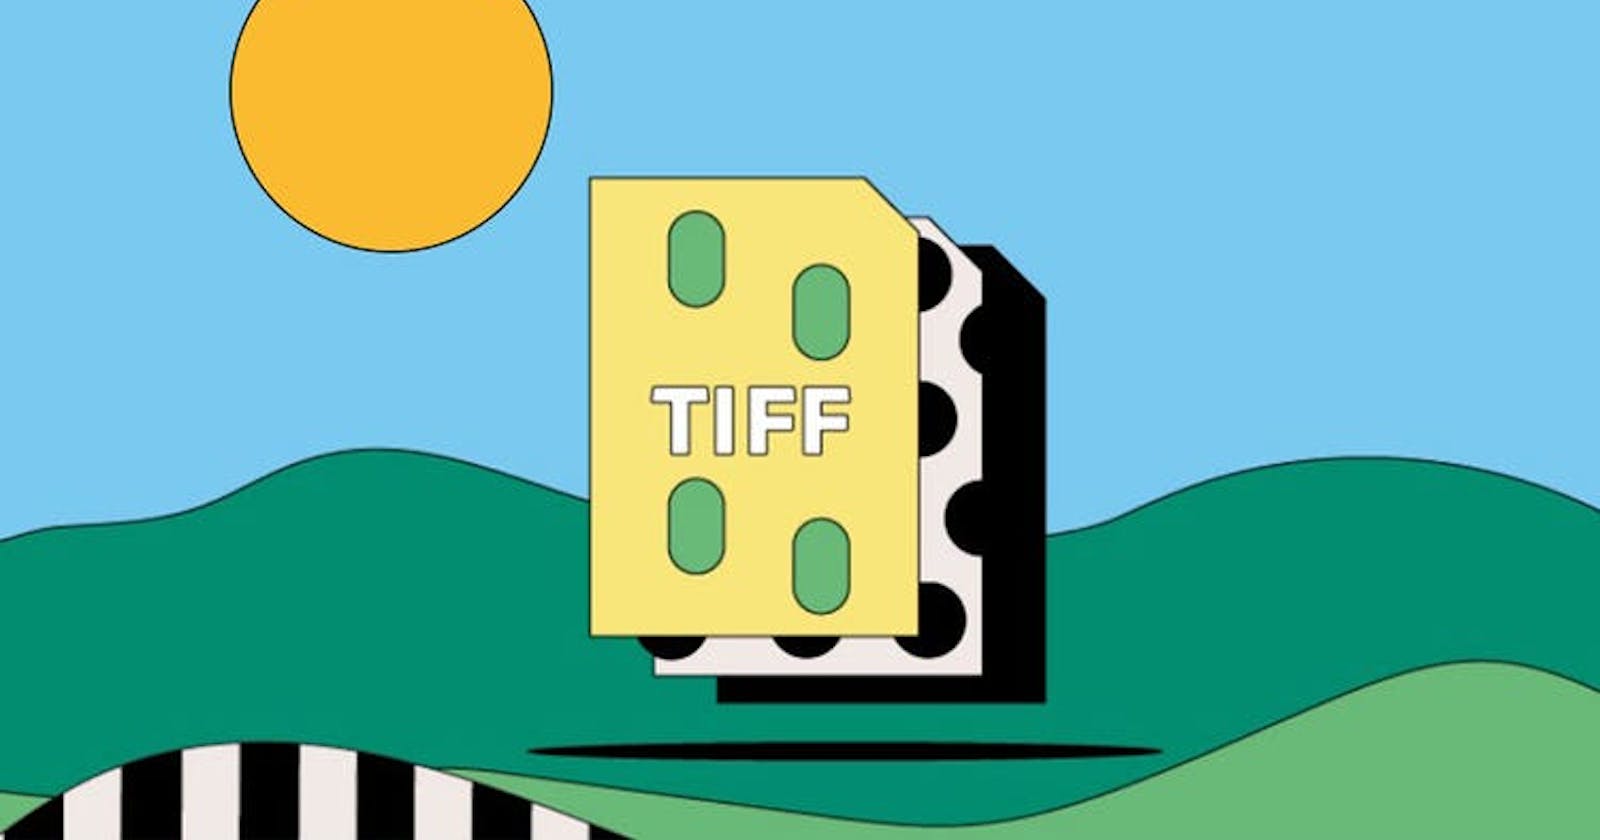 Just in case you are working with tifffle (.tif) images for a Deep Learning project.